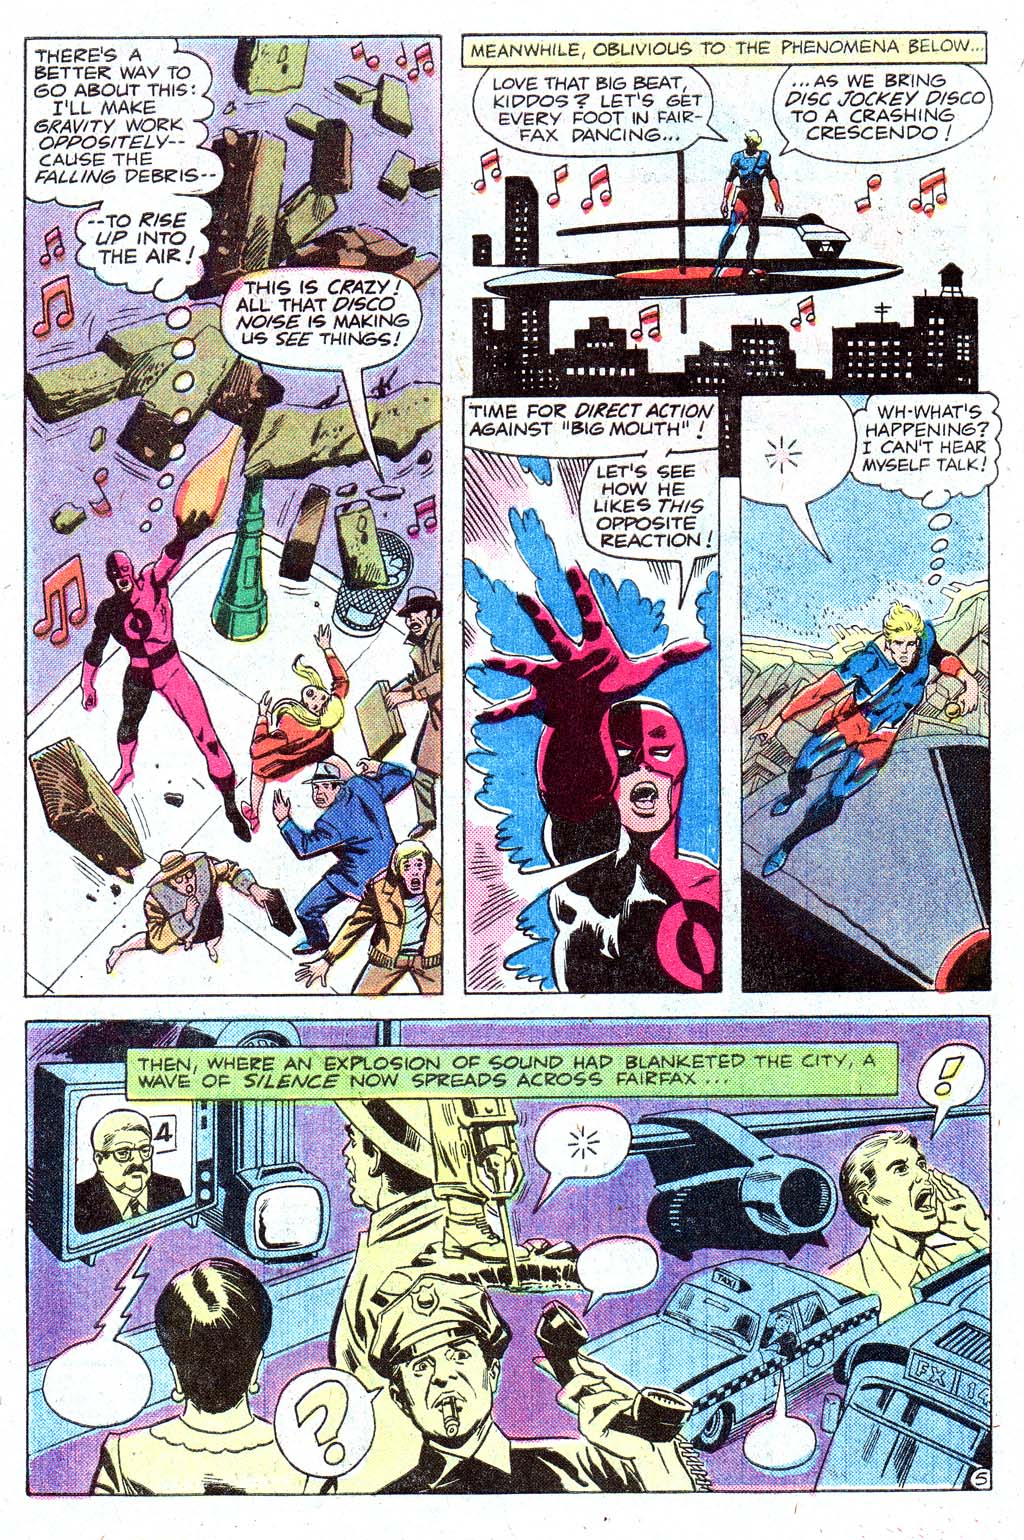 The New Adventures of Superboy 30 Page 29